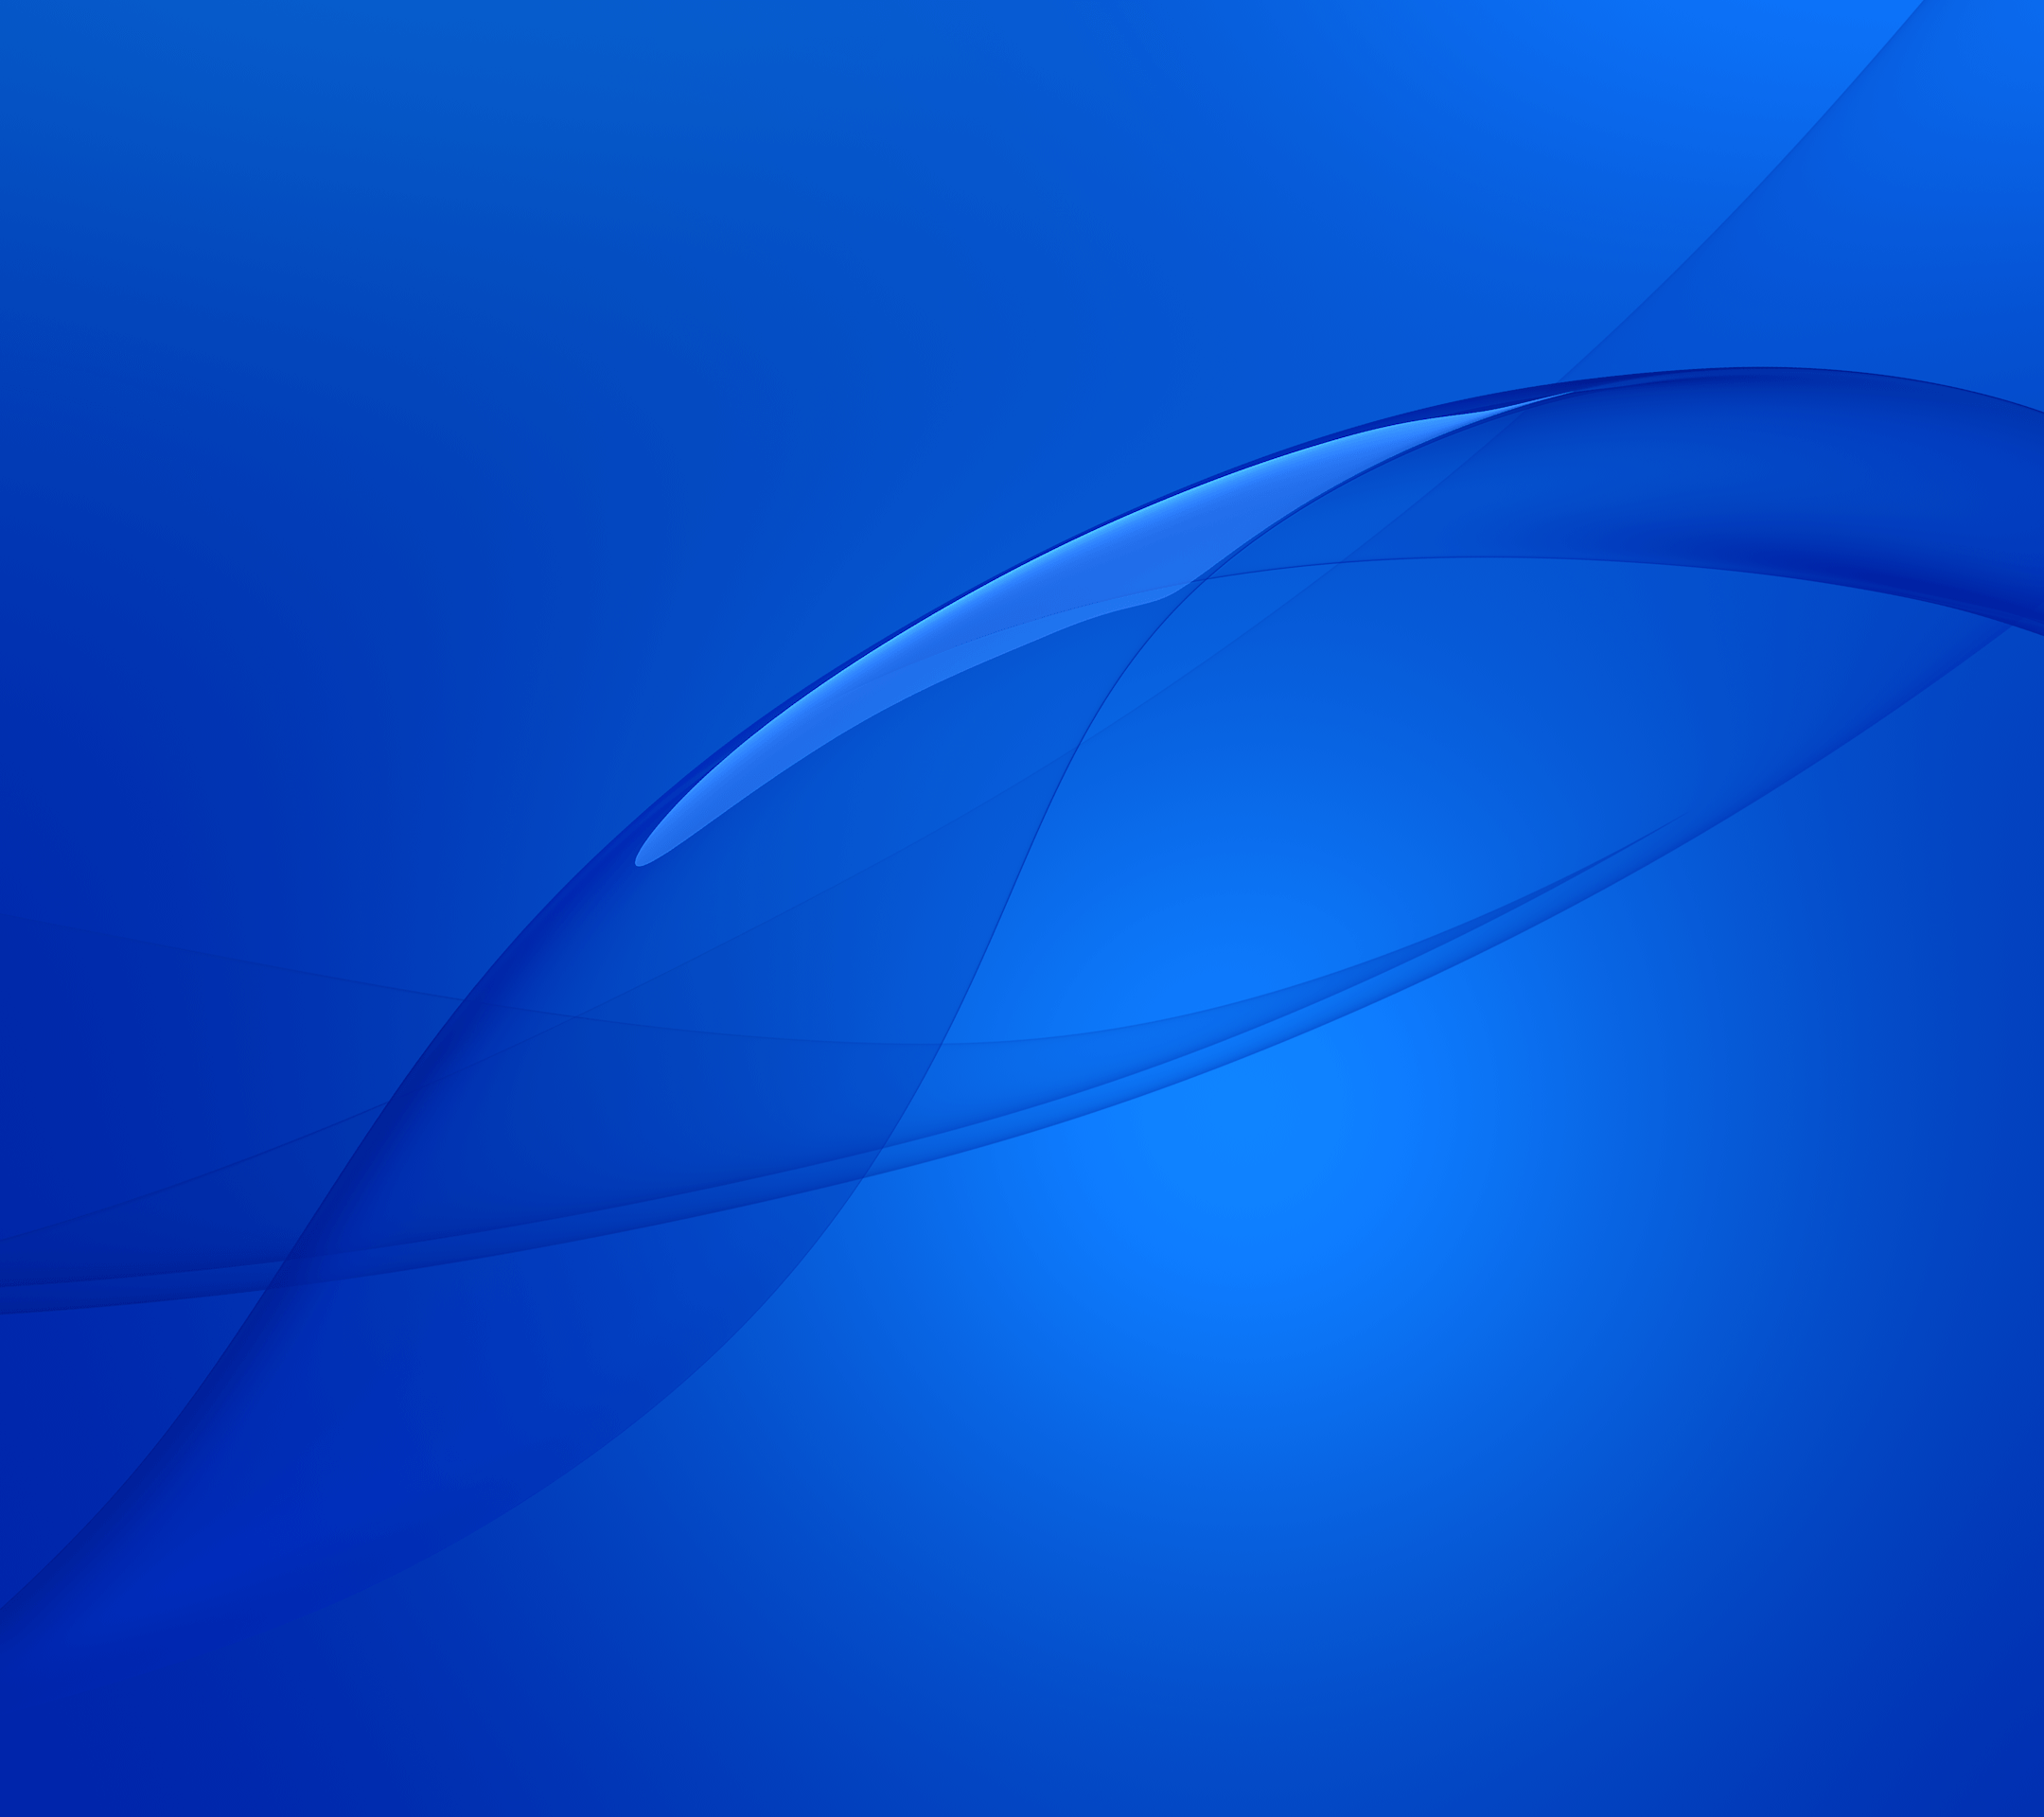 Sony Xperia Z3 wallpaper available for download